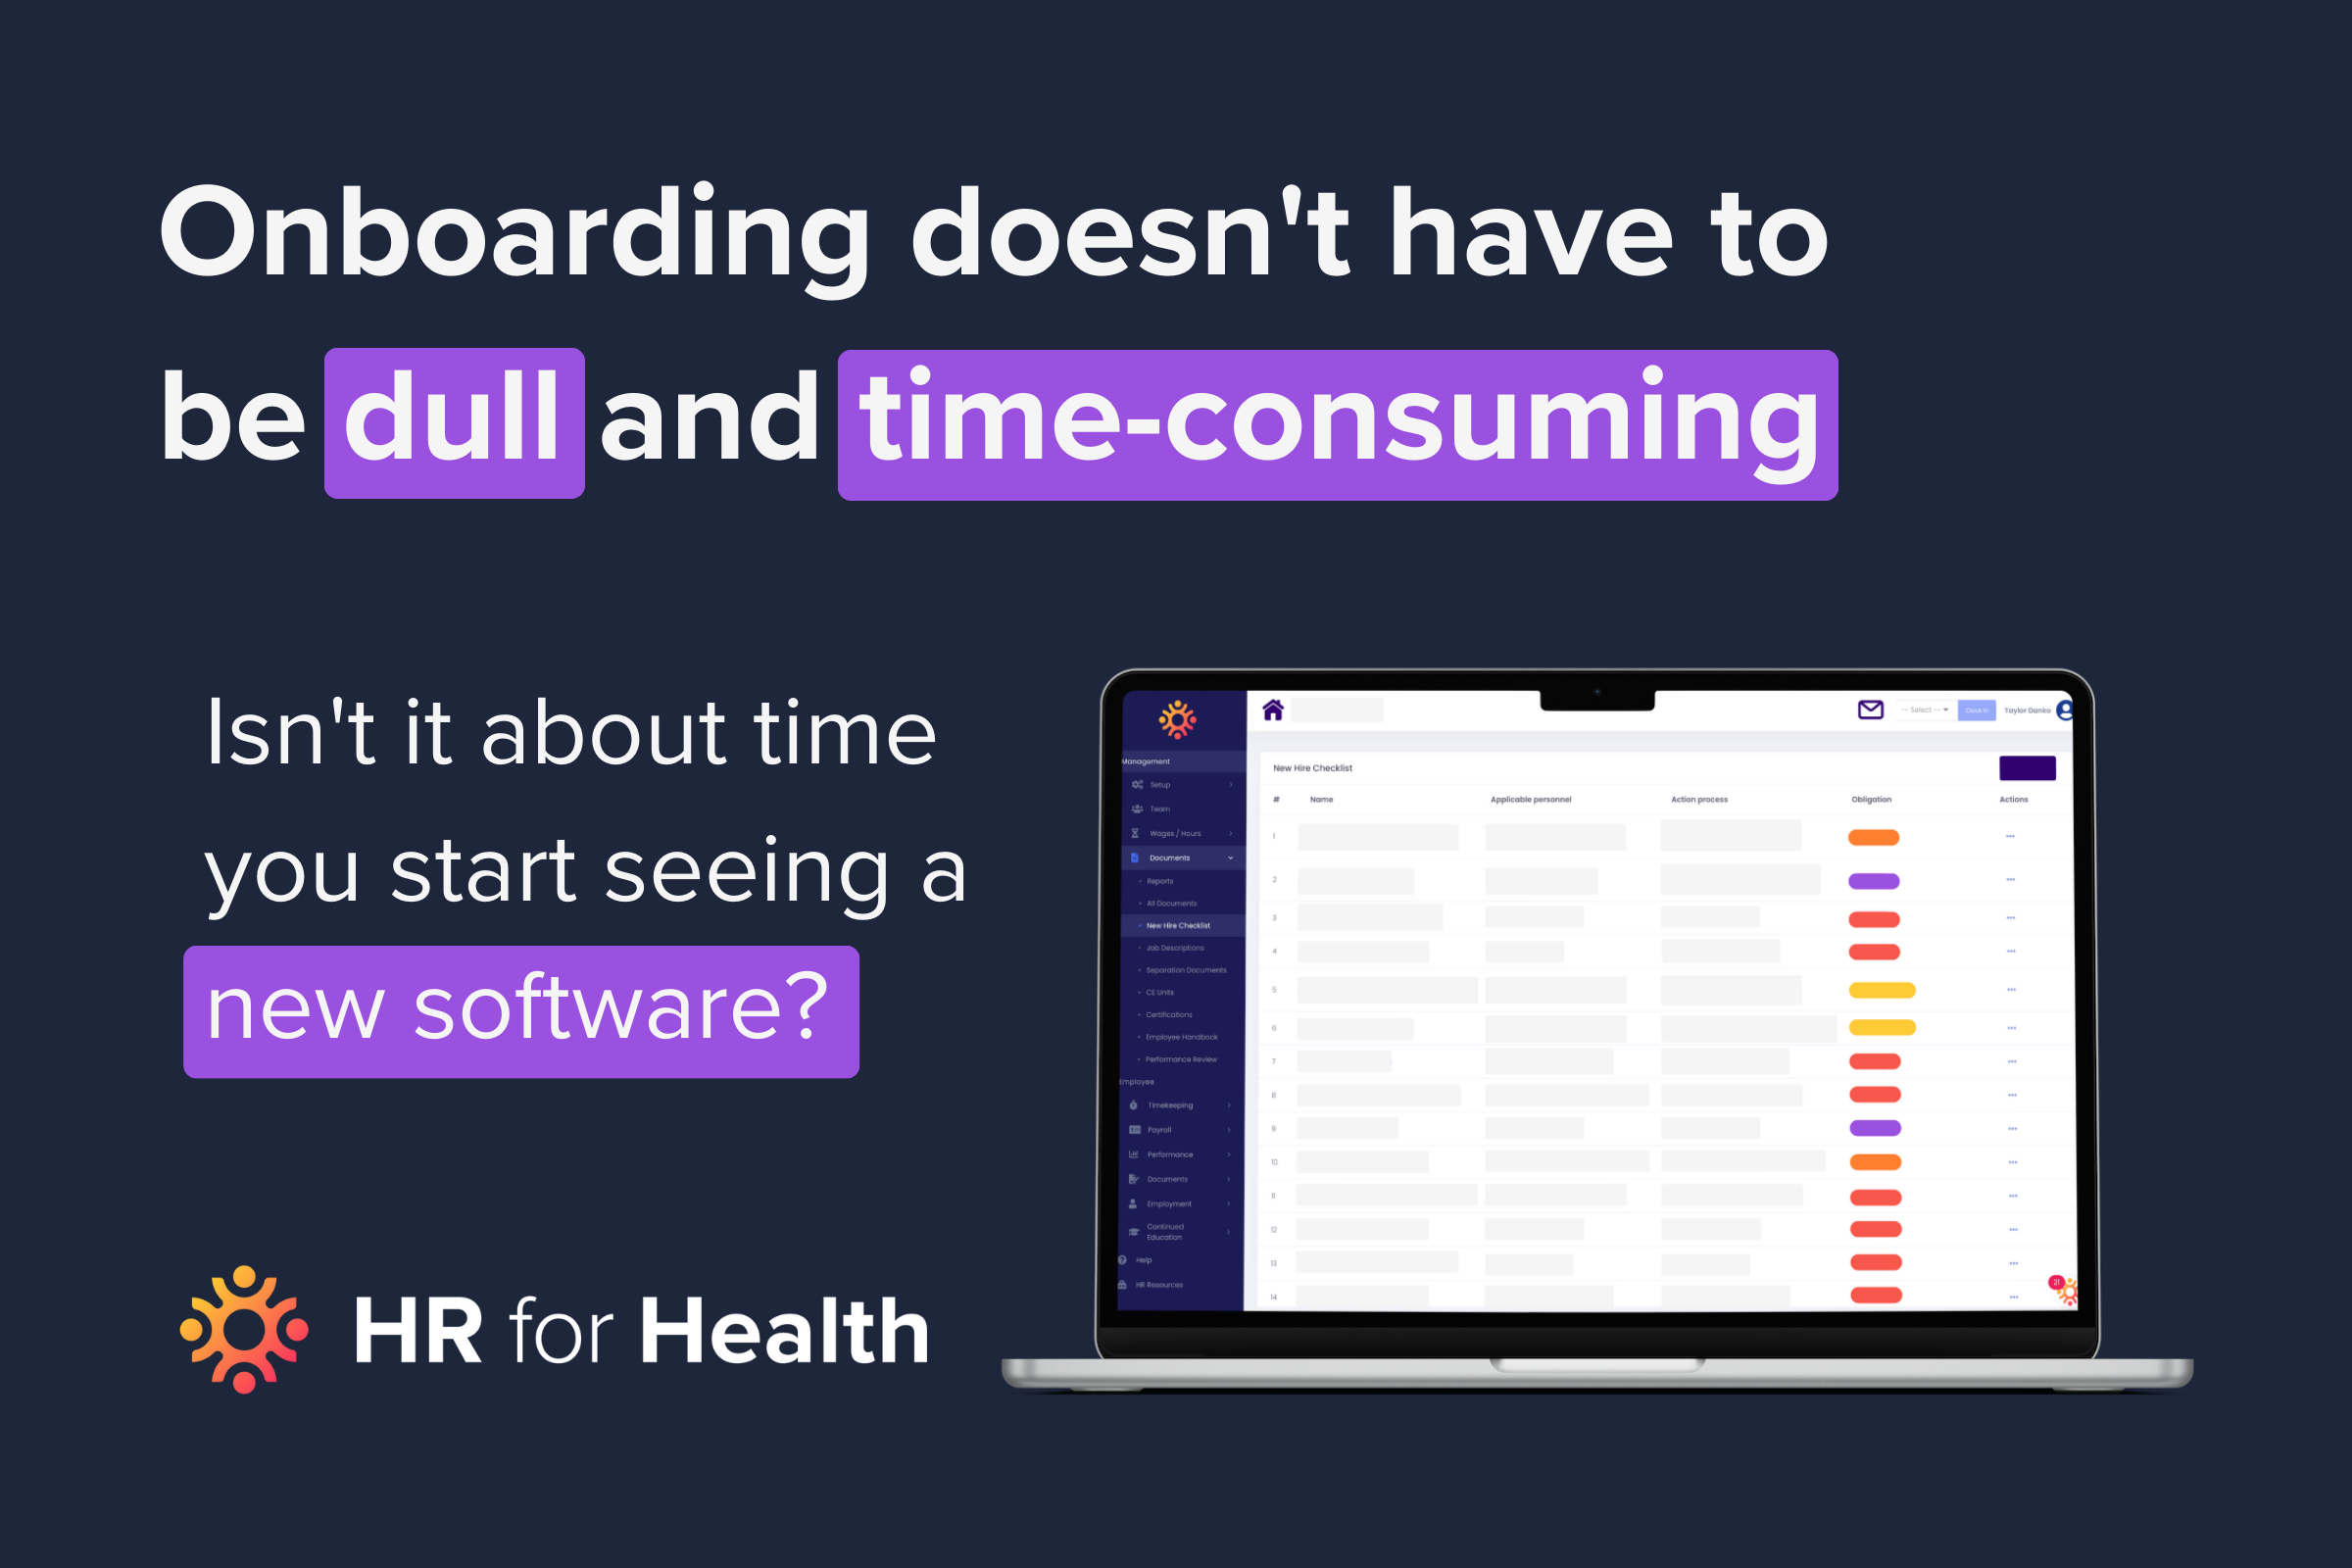 Easy Onboarding Software - HR for Health